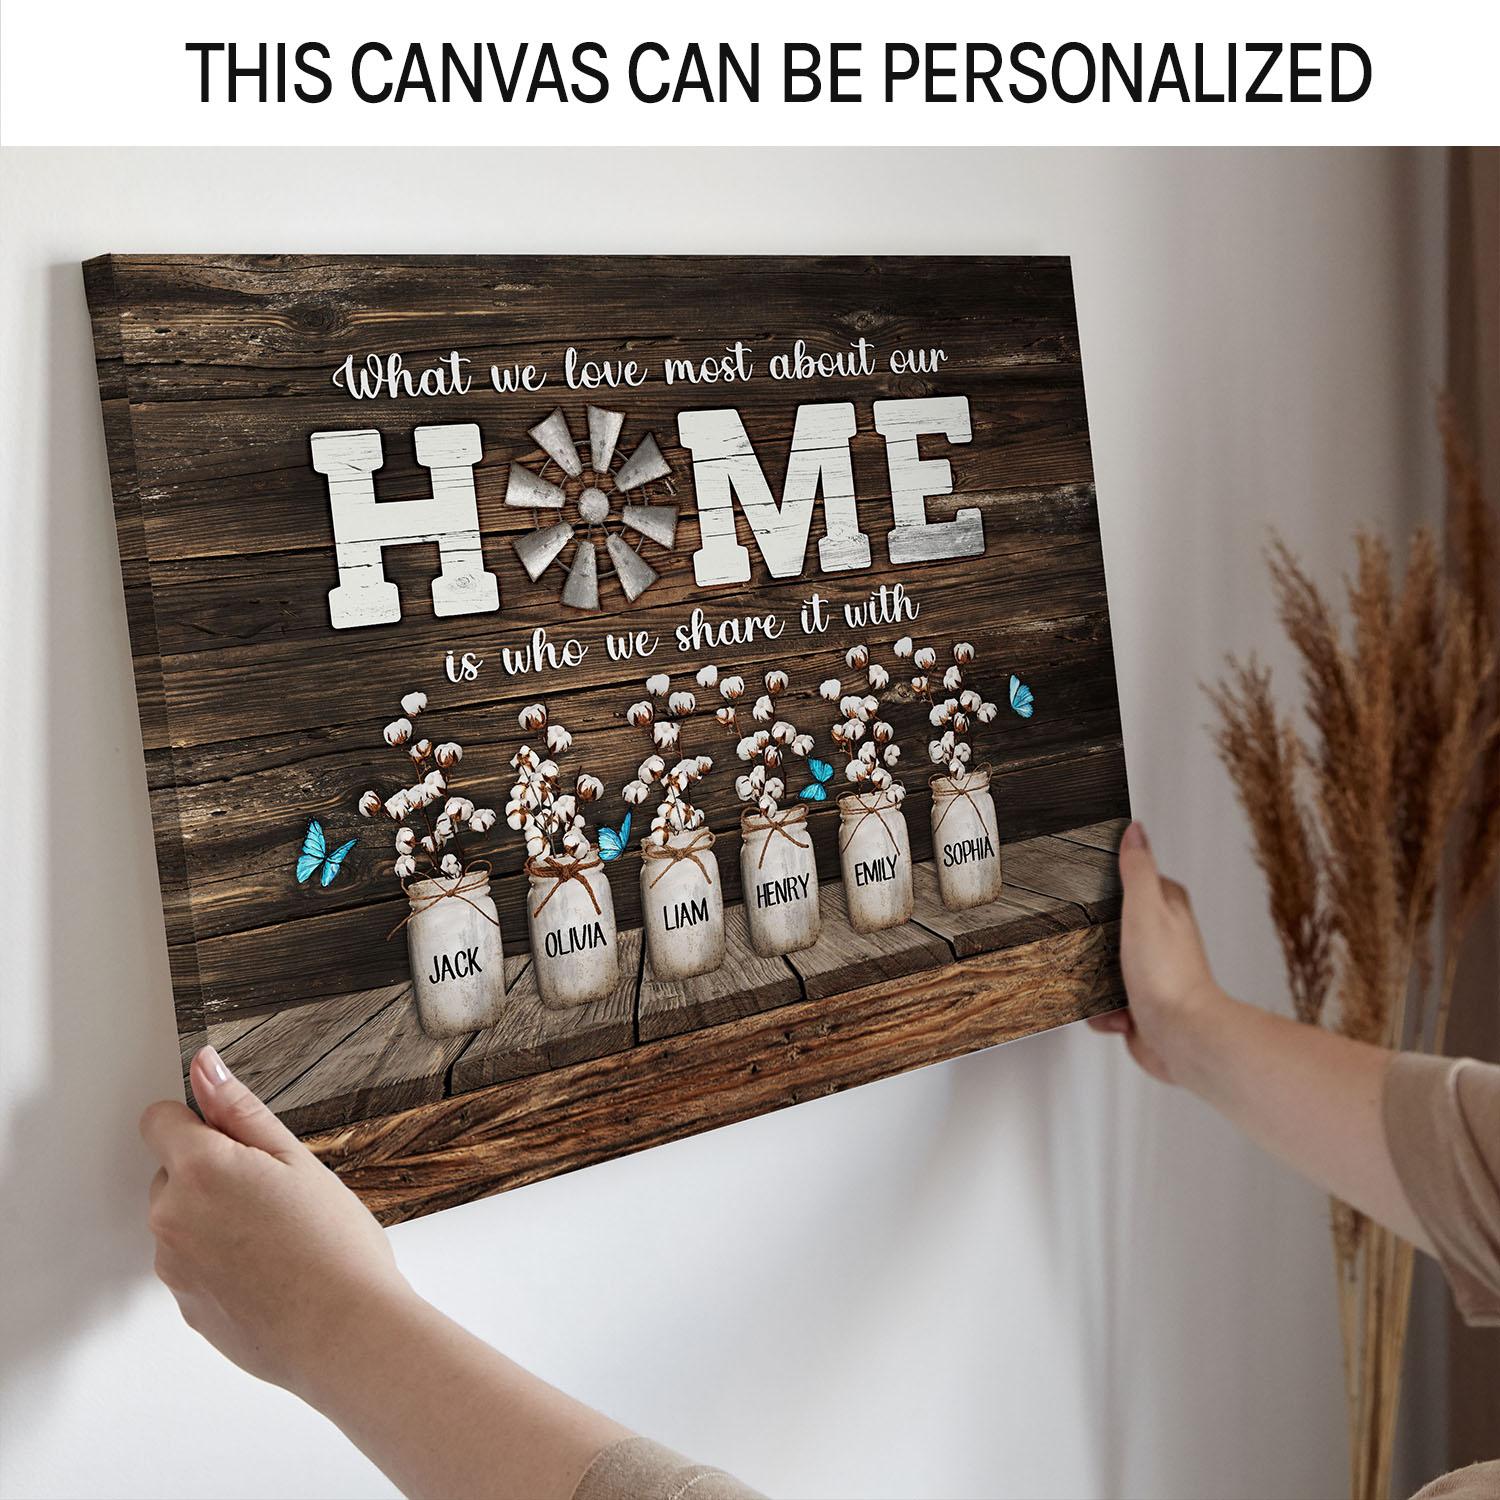 Personalized Mother's day and birthday gift for mom - What we love most about our home - custom Photo Canvas print - MyMindfulGifts